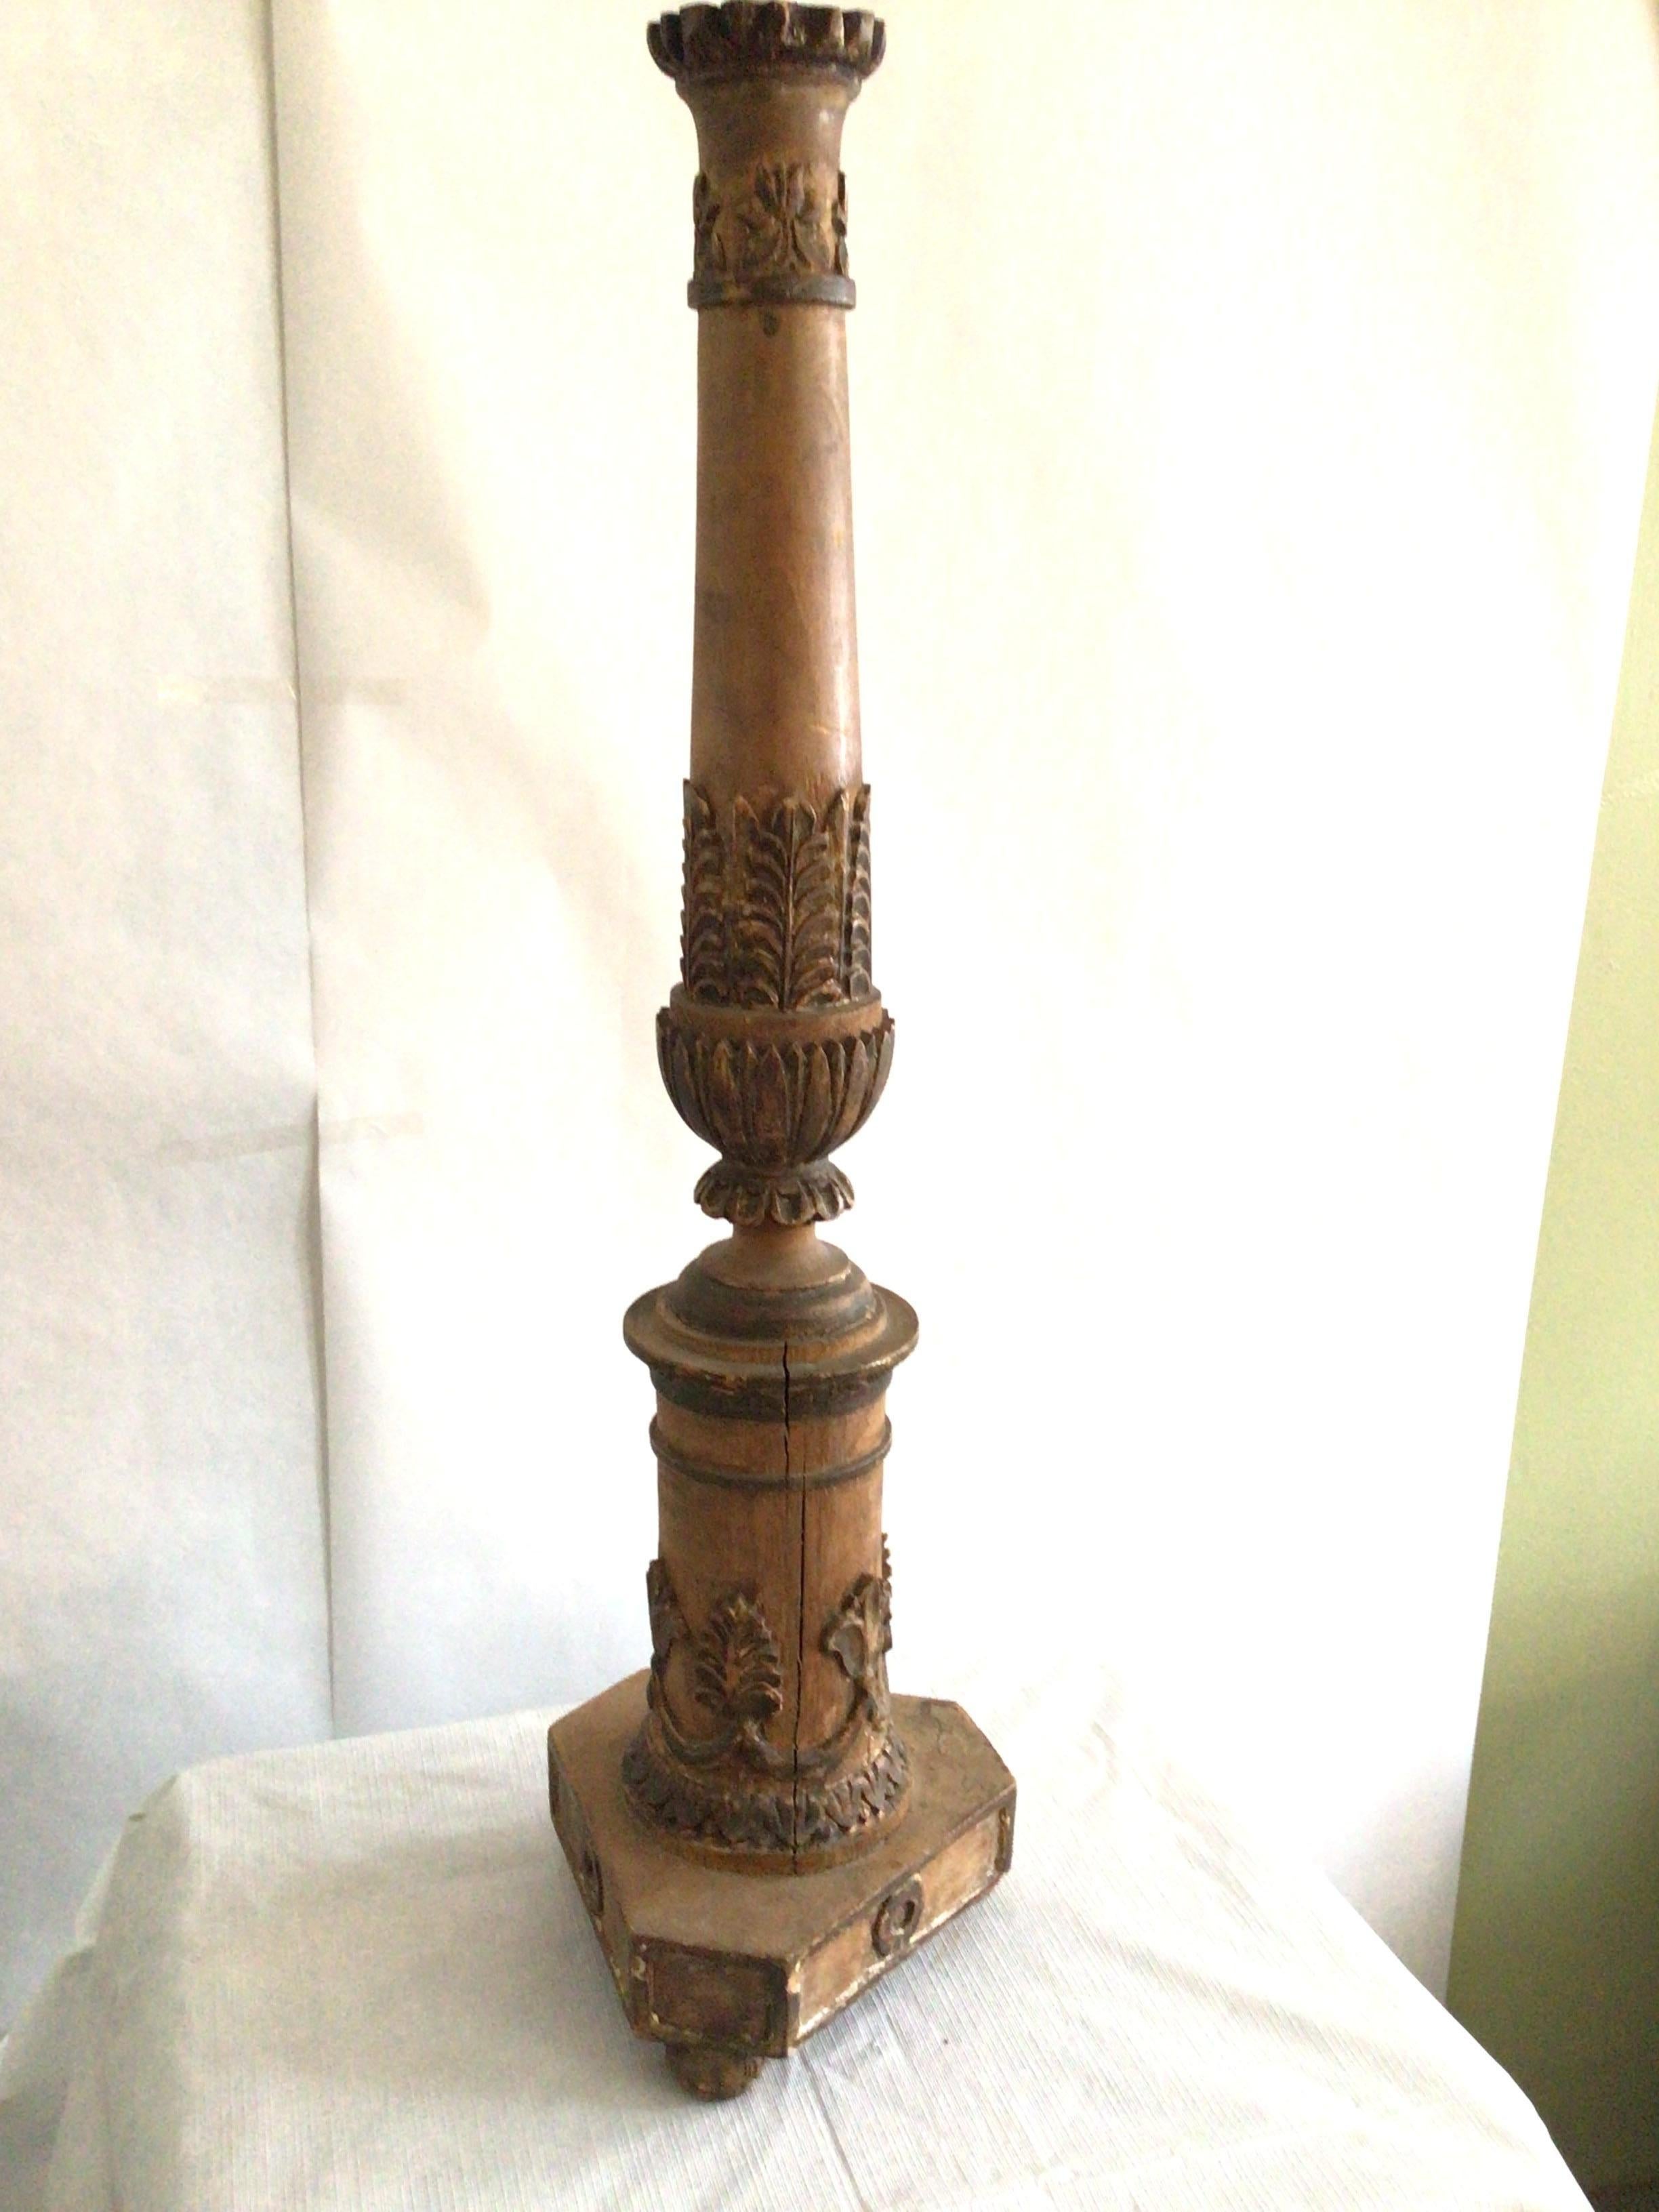 1950s Carved wood column table lamp features acanthus leaves.
Measures: height to top of finial.